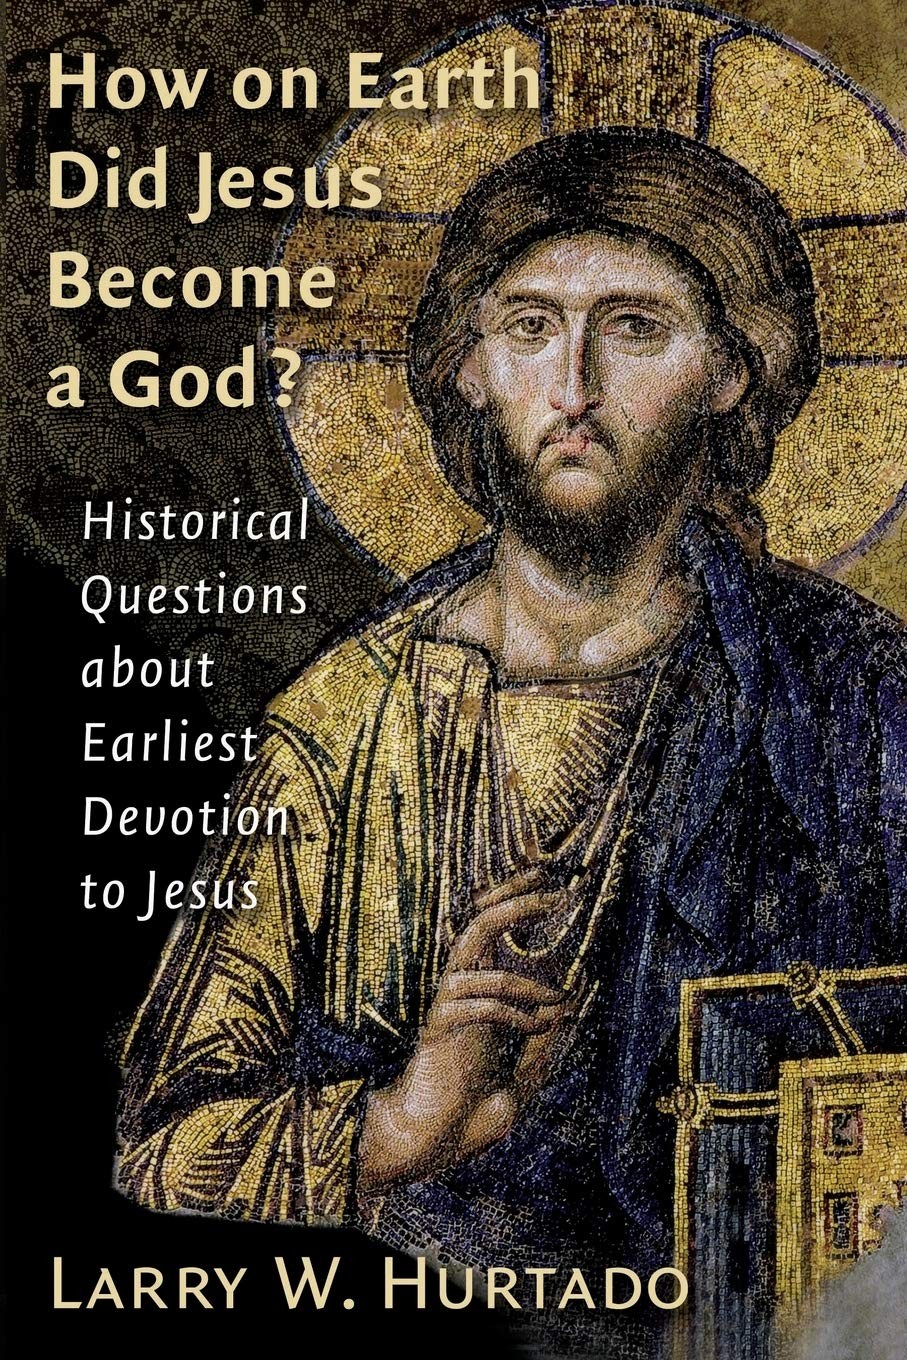 How on Earth Did Jesus Become a God?: Historical Questions About Earliest Devotion to Jesus